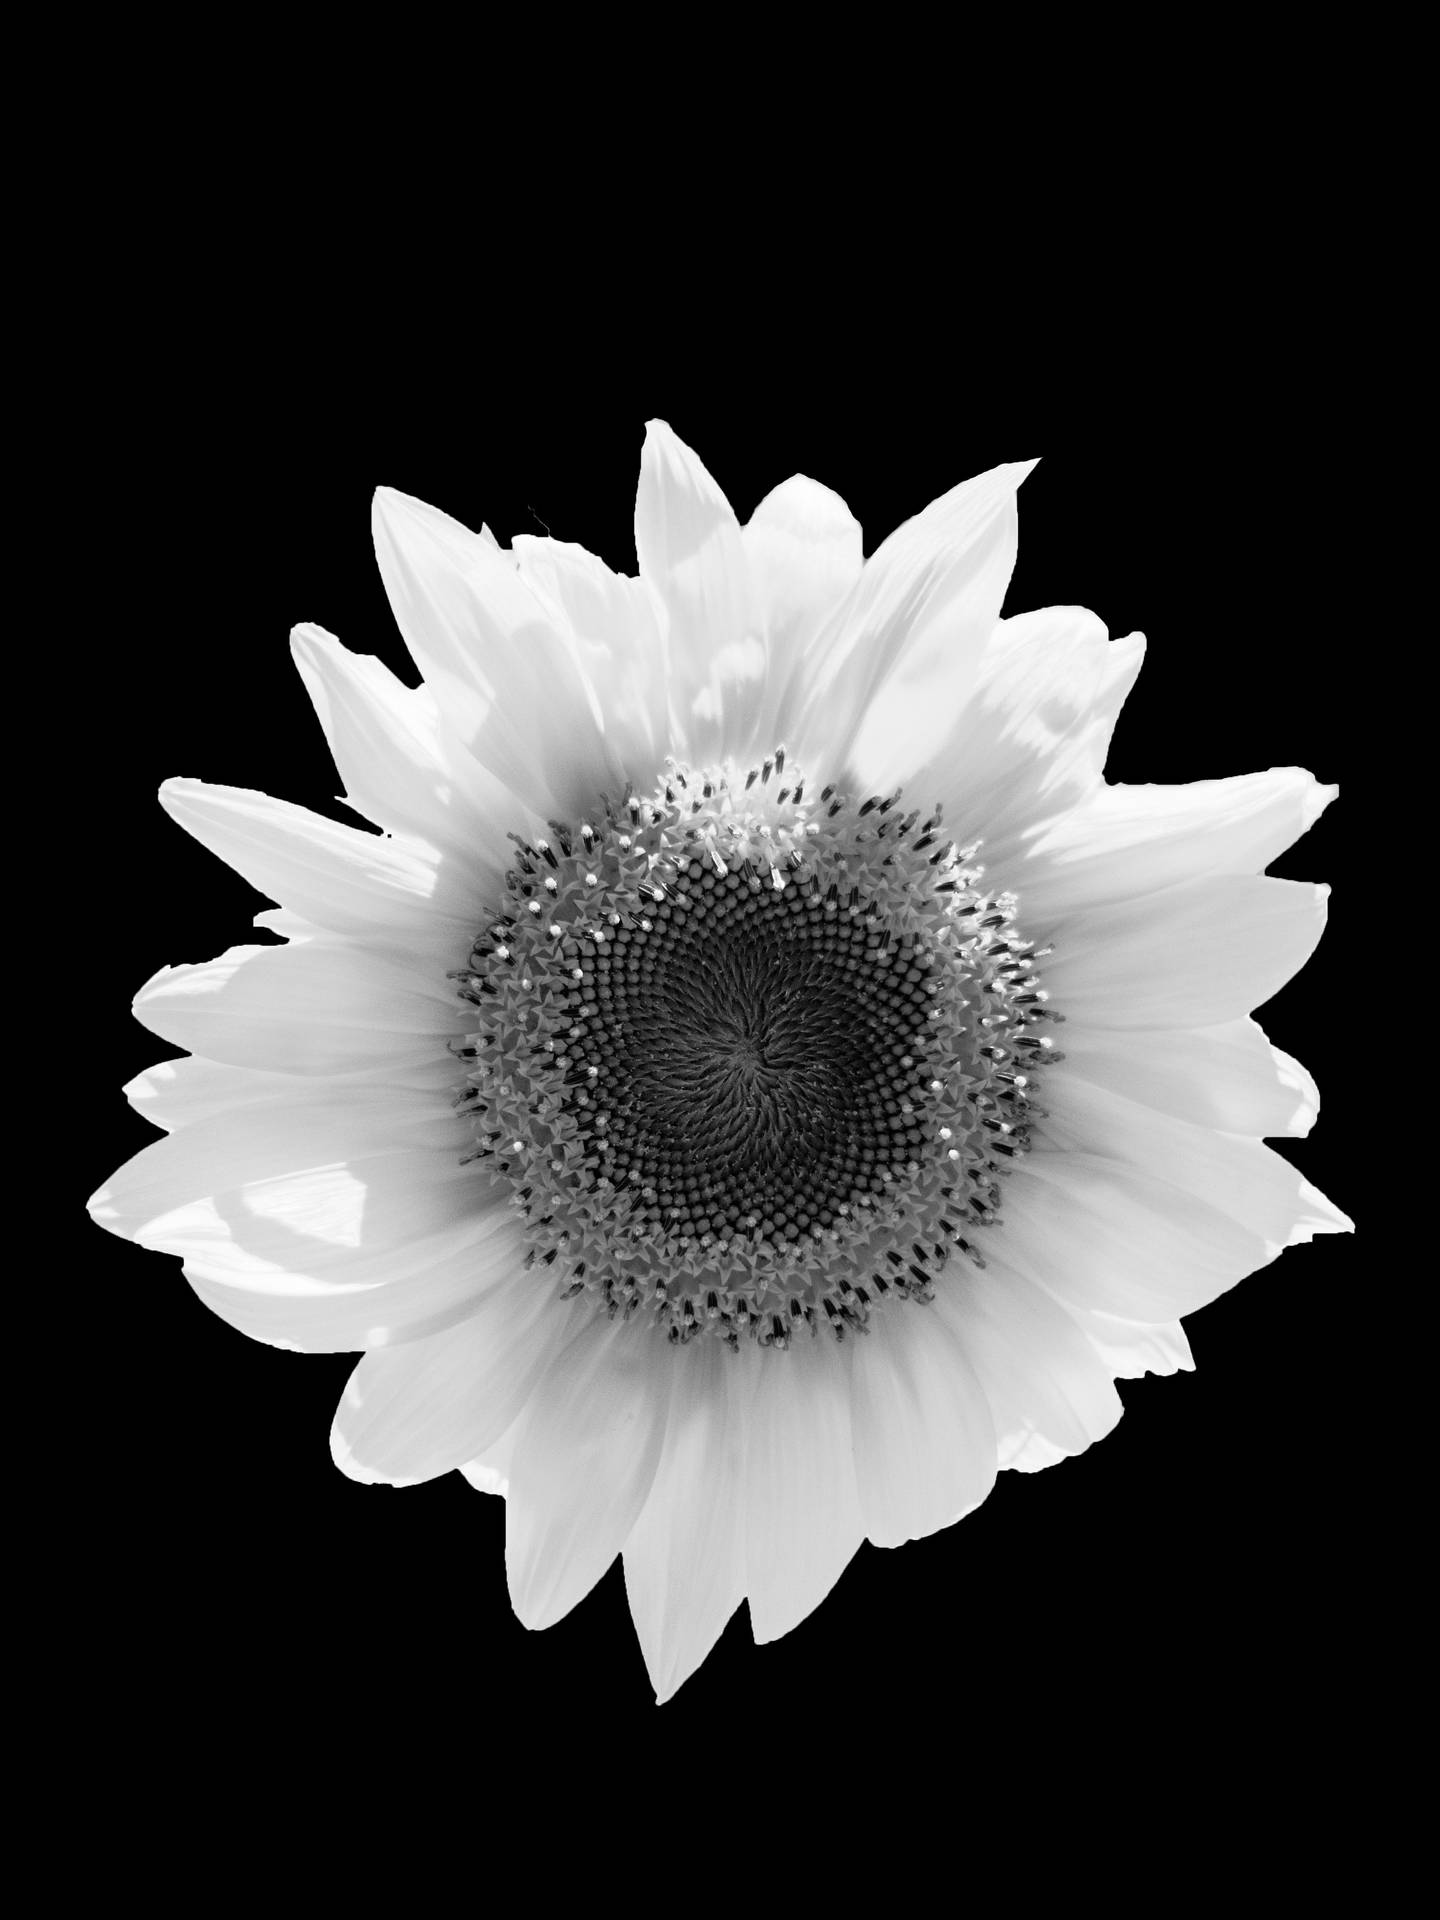 Black And White Flower Android Background